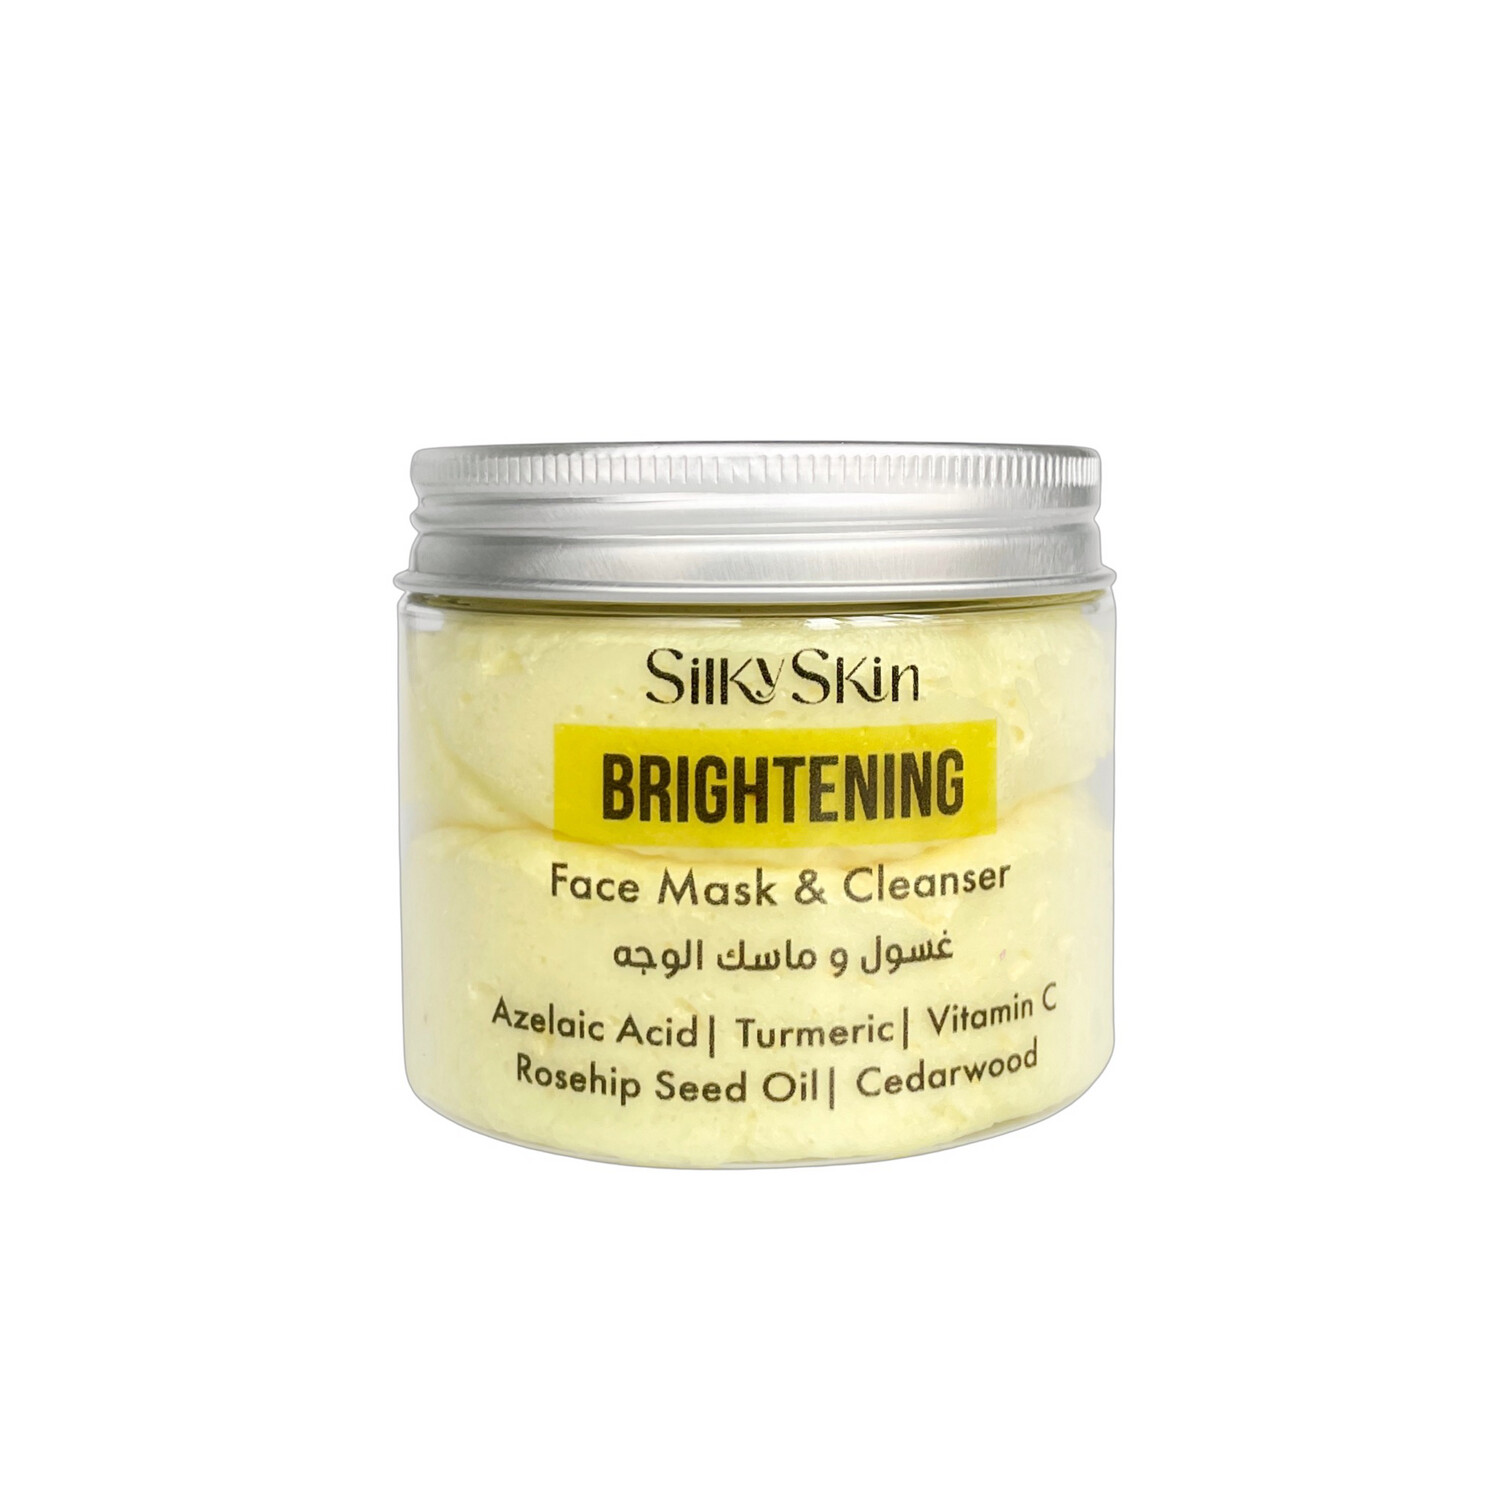 Brightening Face Mask & Cleanser